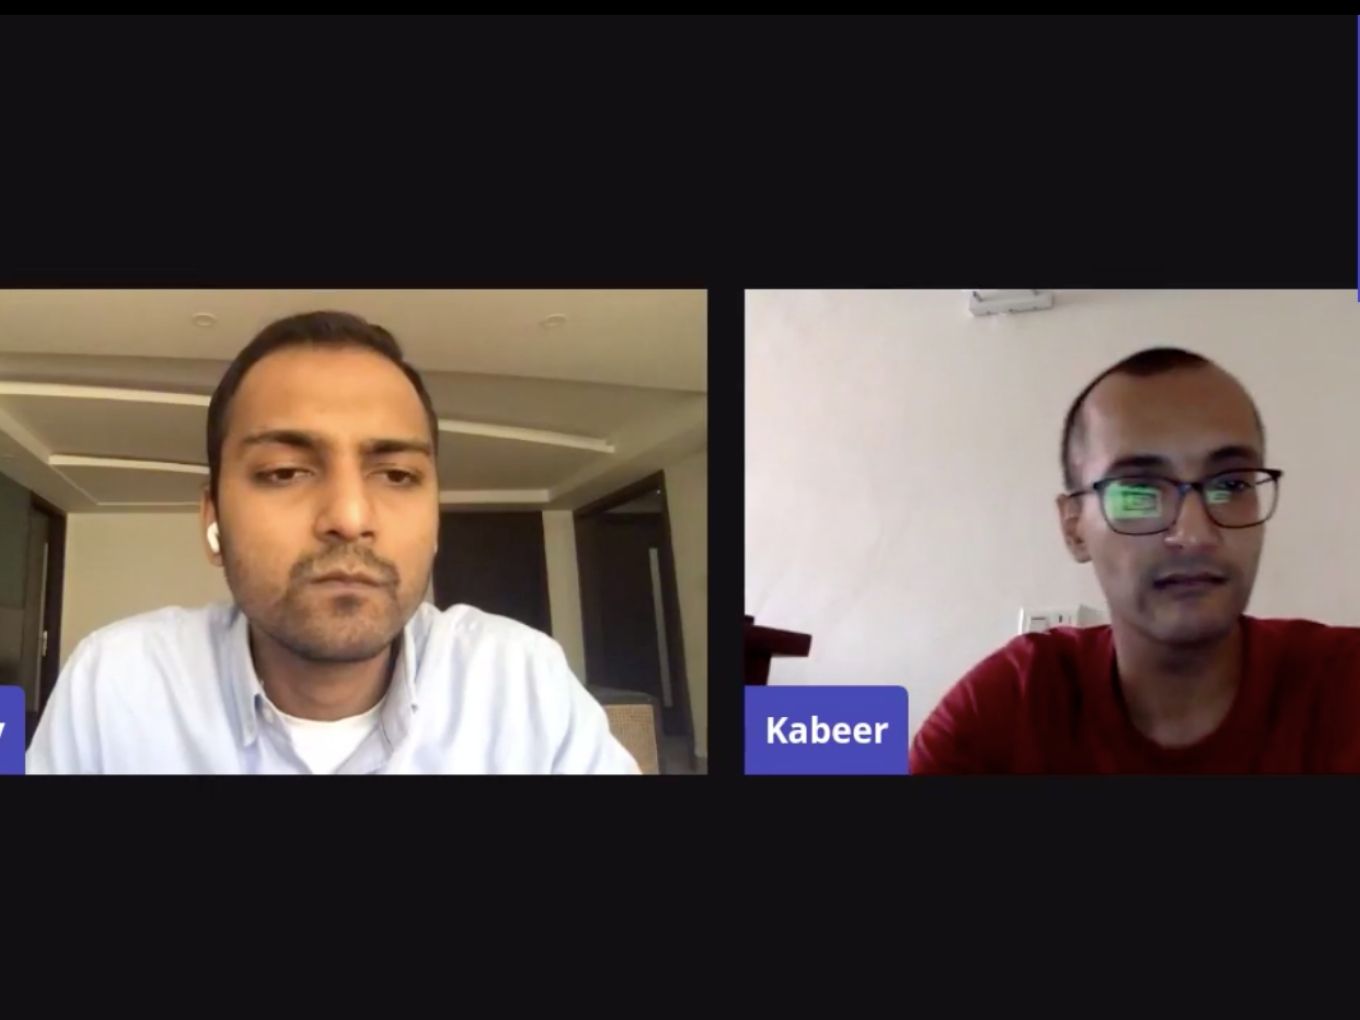 #StartupsVsCovid19: Dunzo’s Kabir Biswas On Growth Amid Covid-19, Drone Deliveries & More